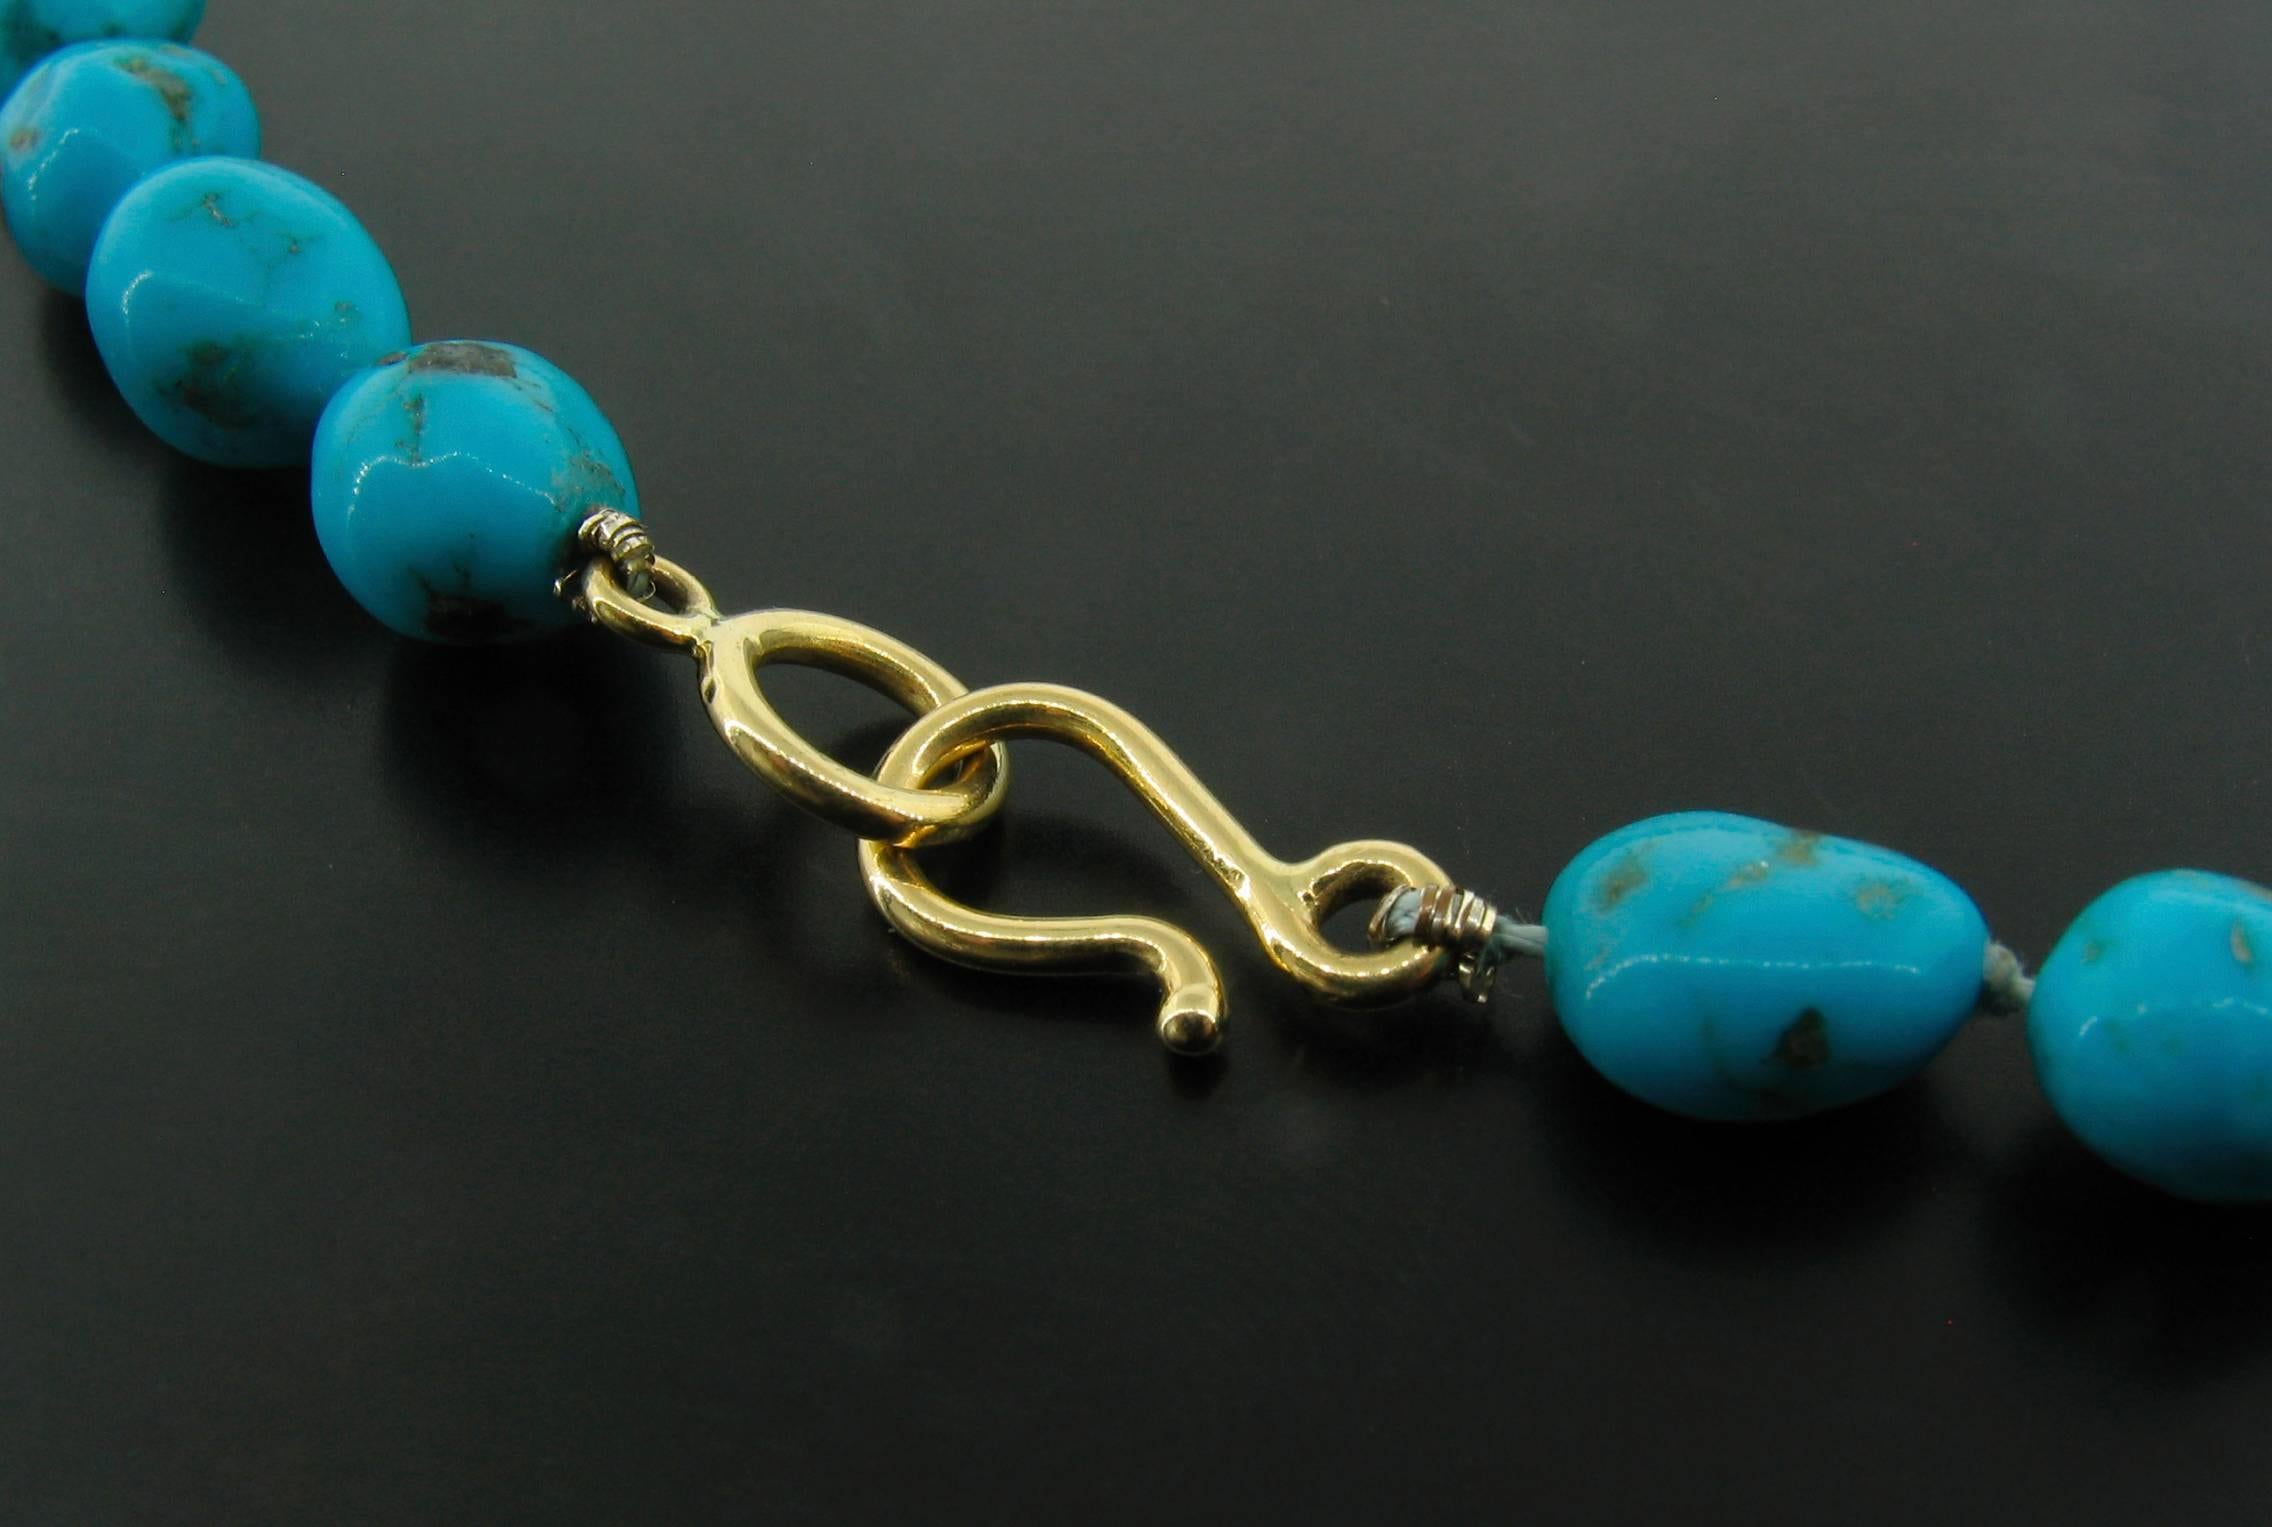 This baroque-style Turquoise bead necklace was designed and made by well known designer Victor Velyan.  It contains 40 beads, individually knotted on silk and measures 18